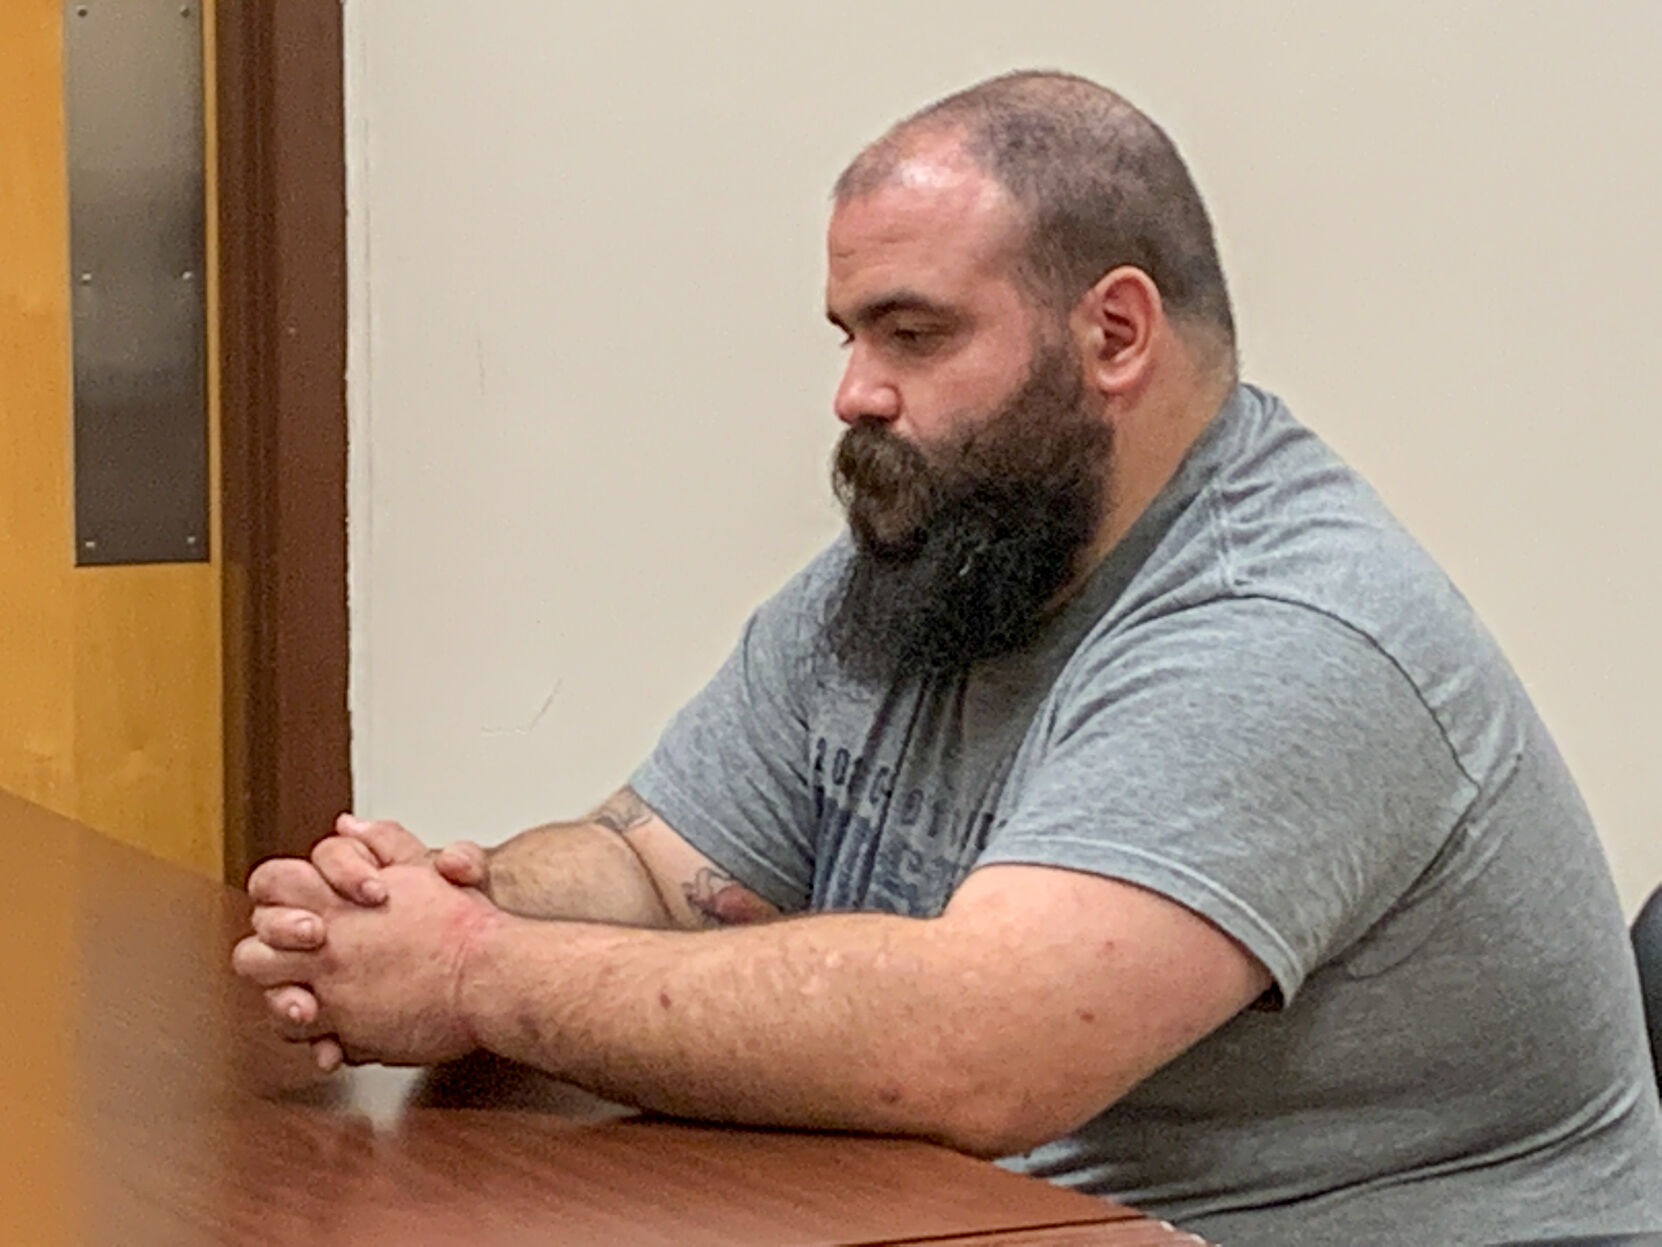 28-year-old admits distributing and making child porn in Harrison County, West Virginia Local News for Harrison County wvnews pic